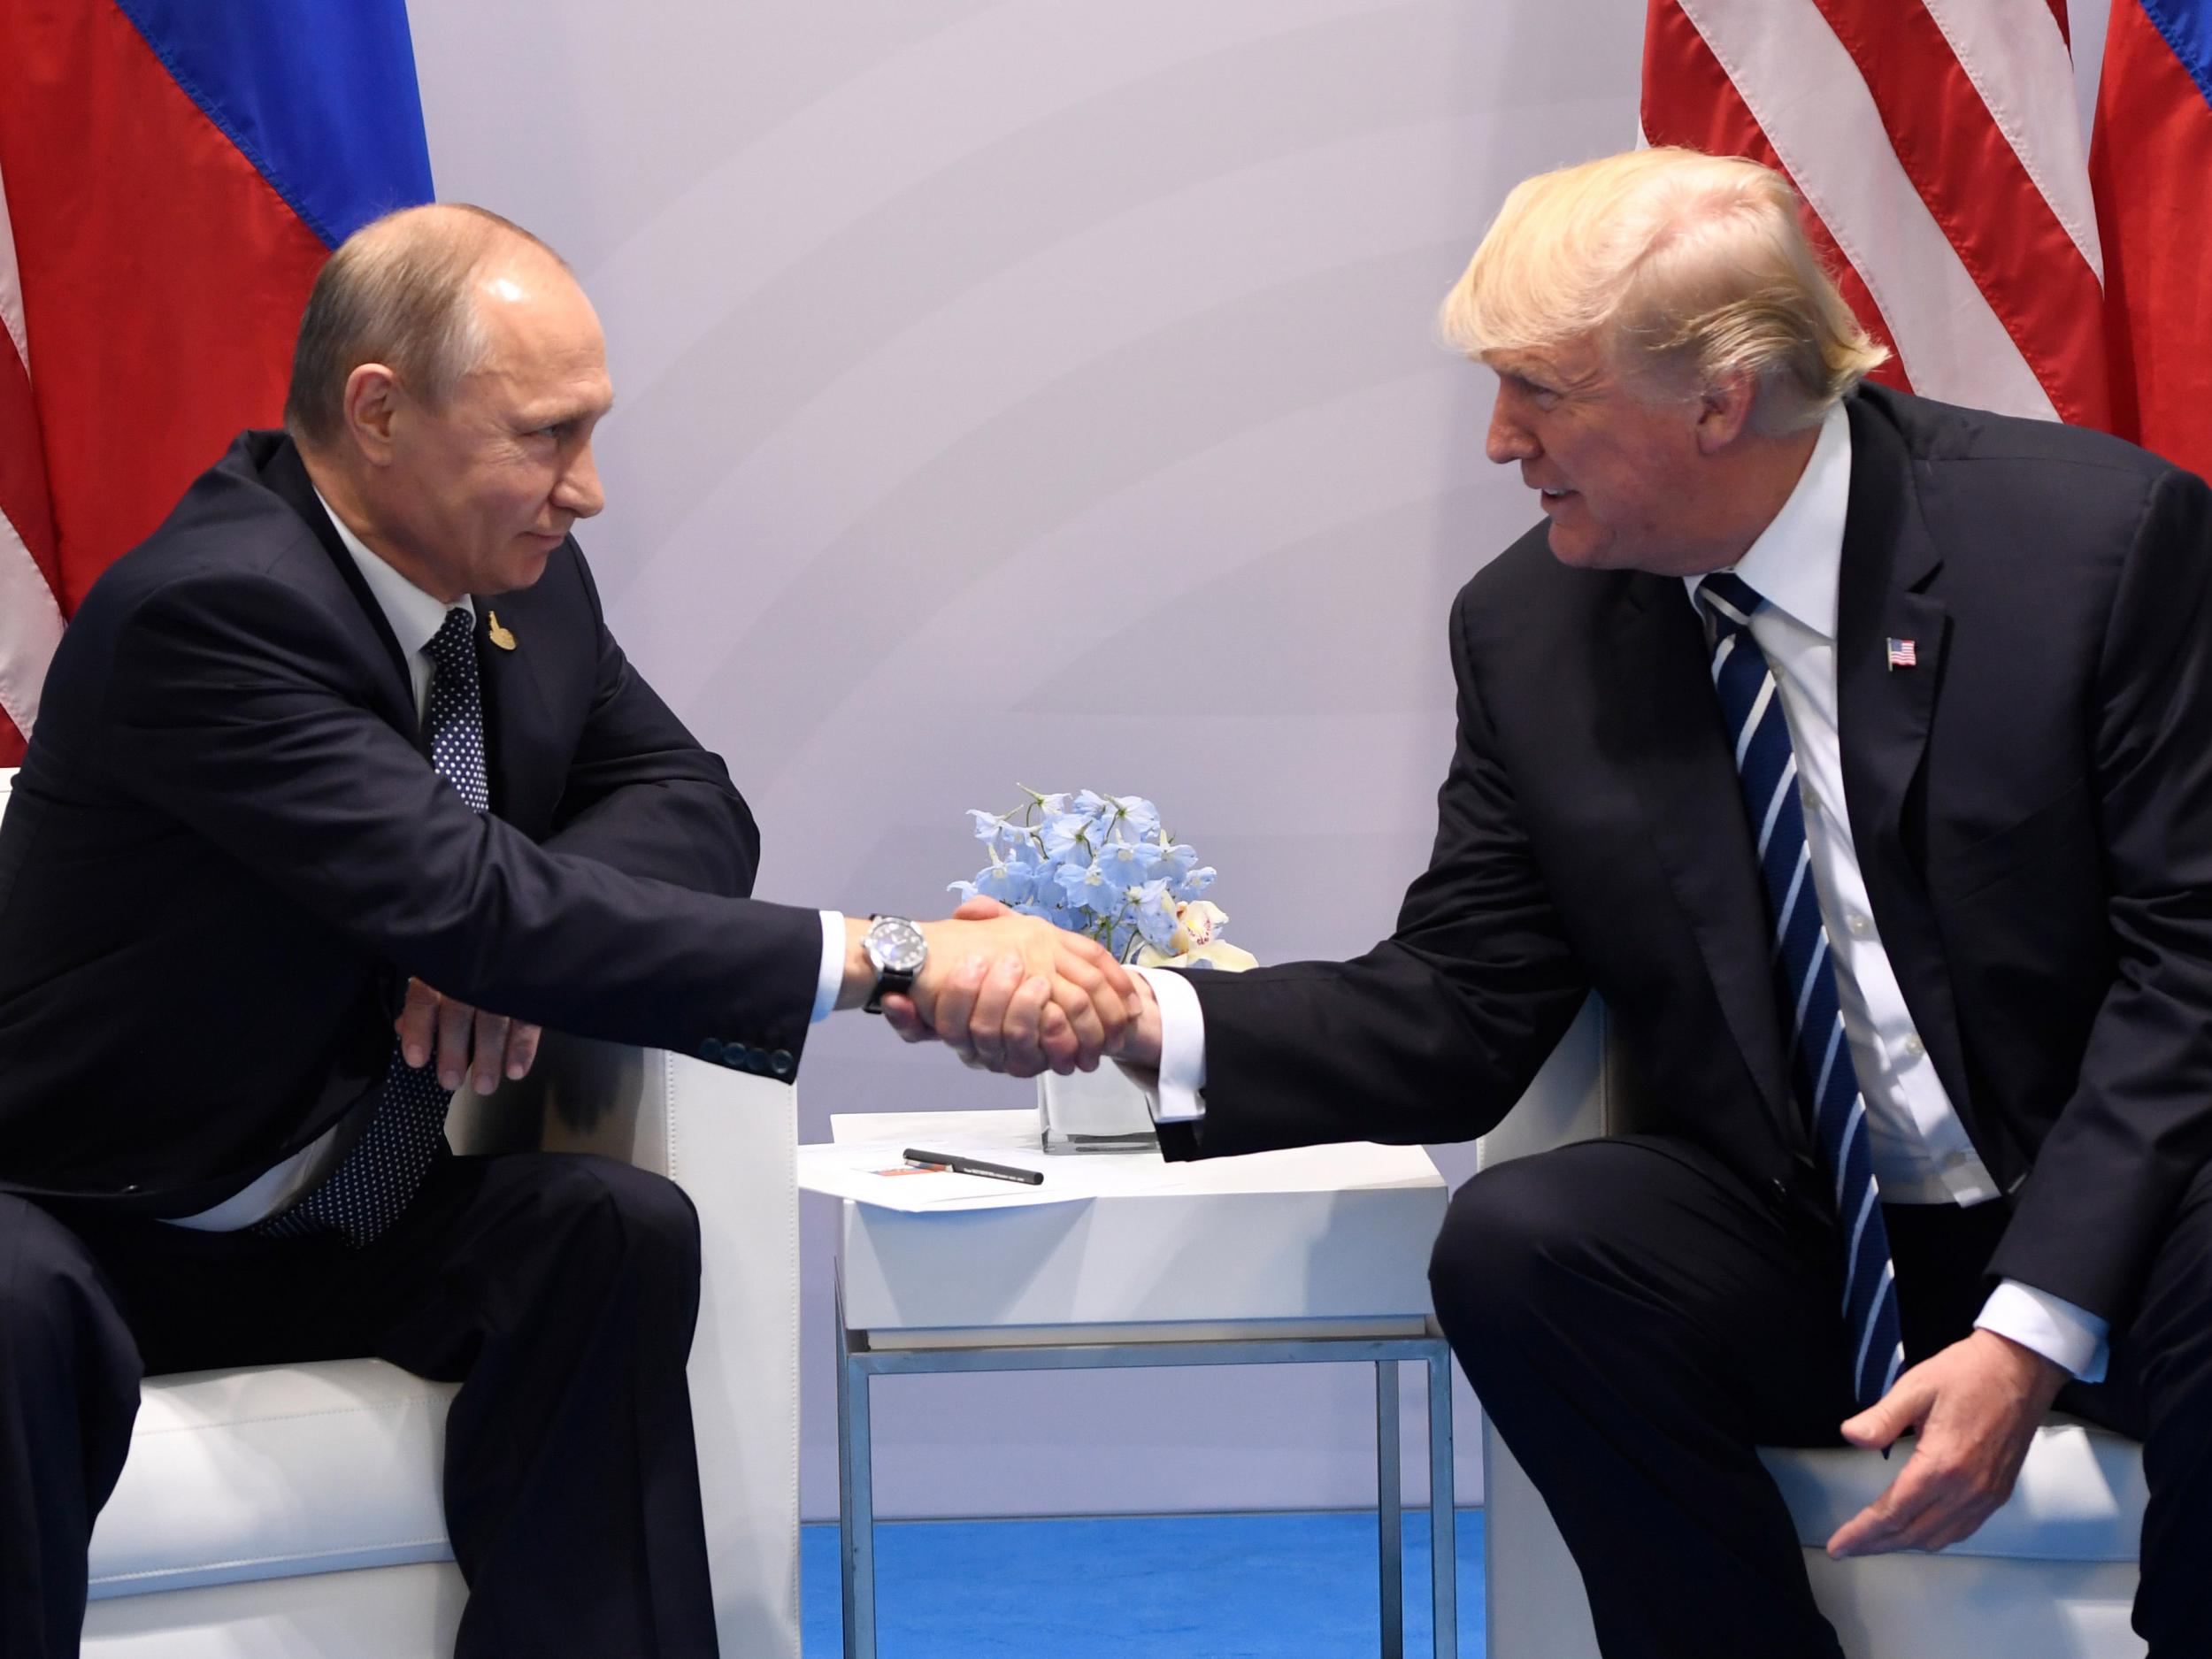 Donald Trump and Vladimir Putin shake hands during a meeting on the sidelines of the G20 Summit in Hamburg, Germany